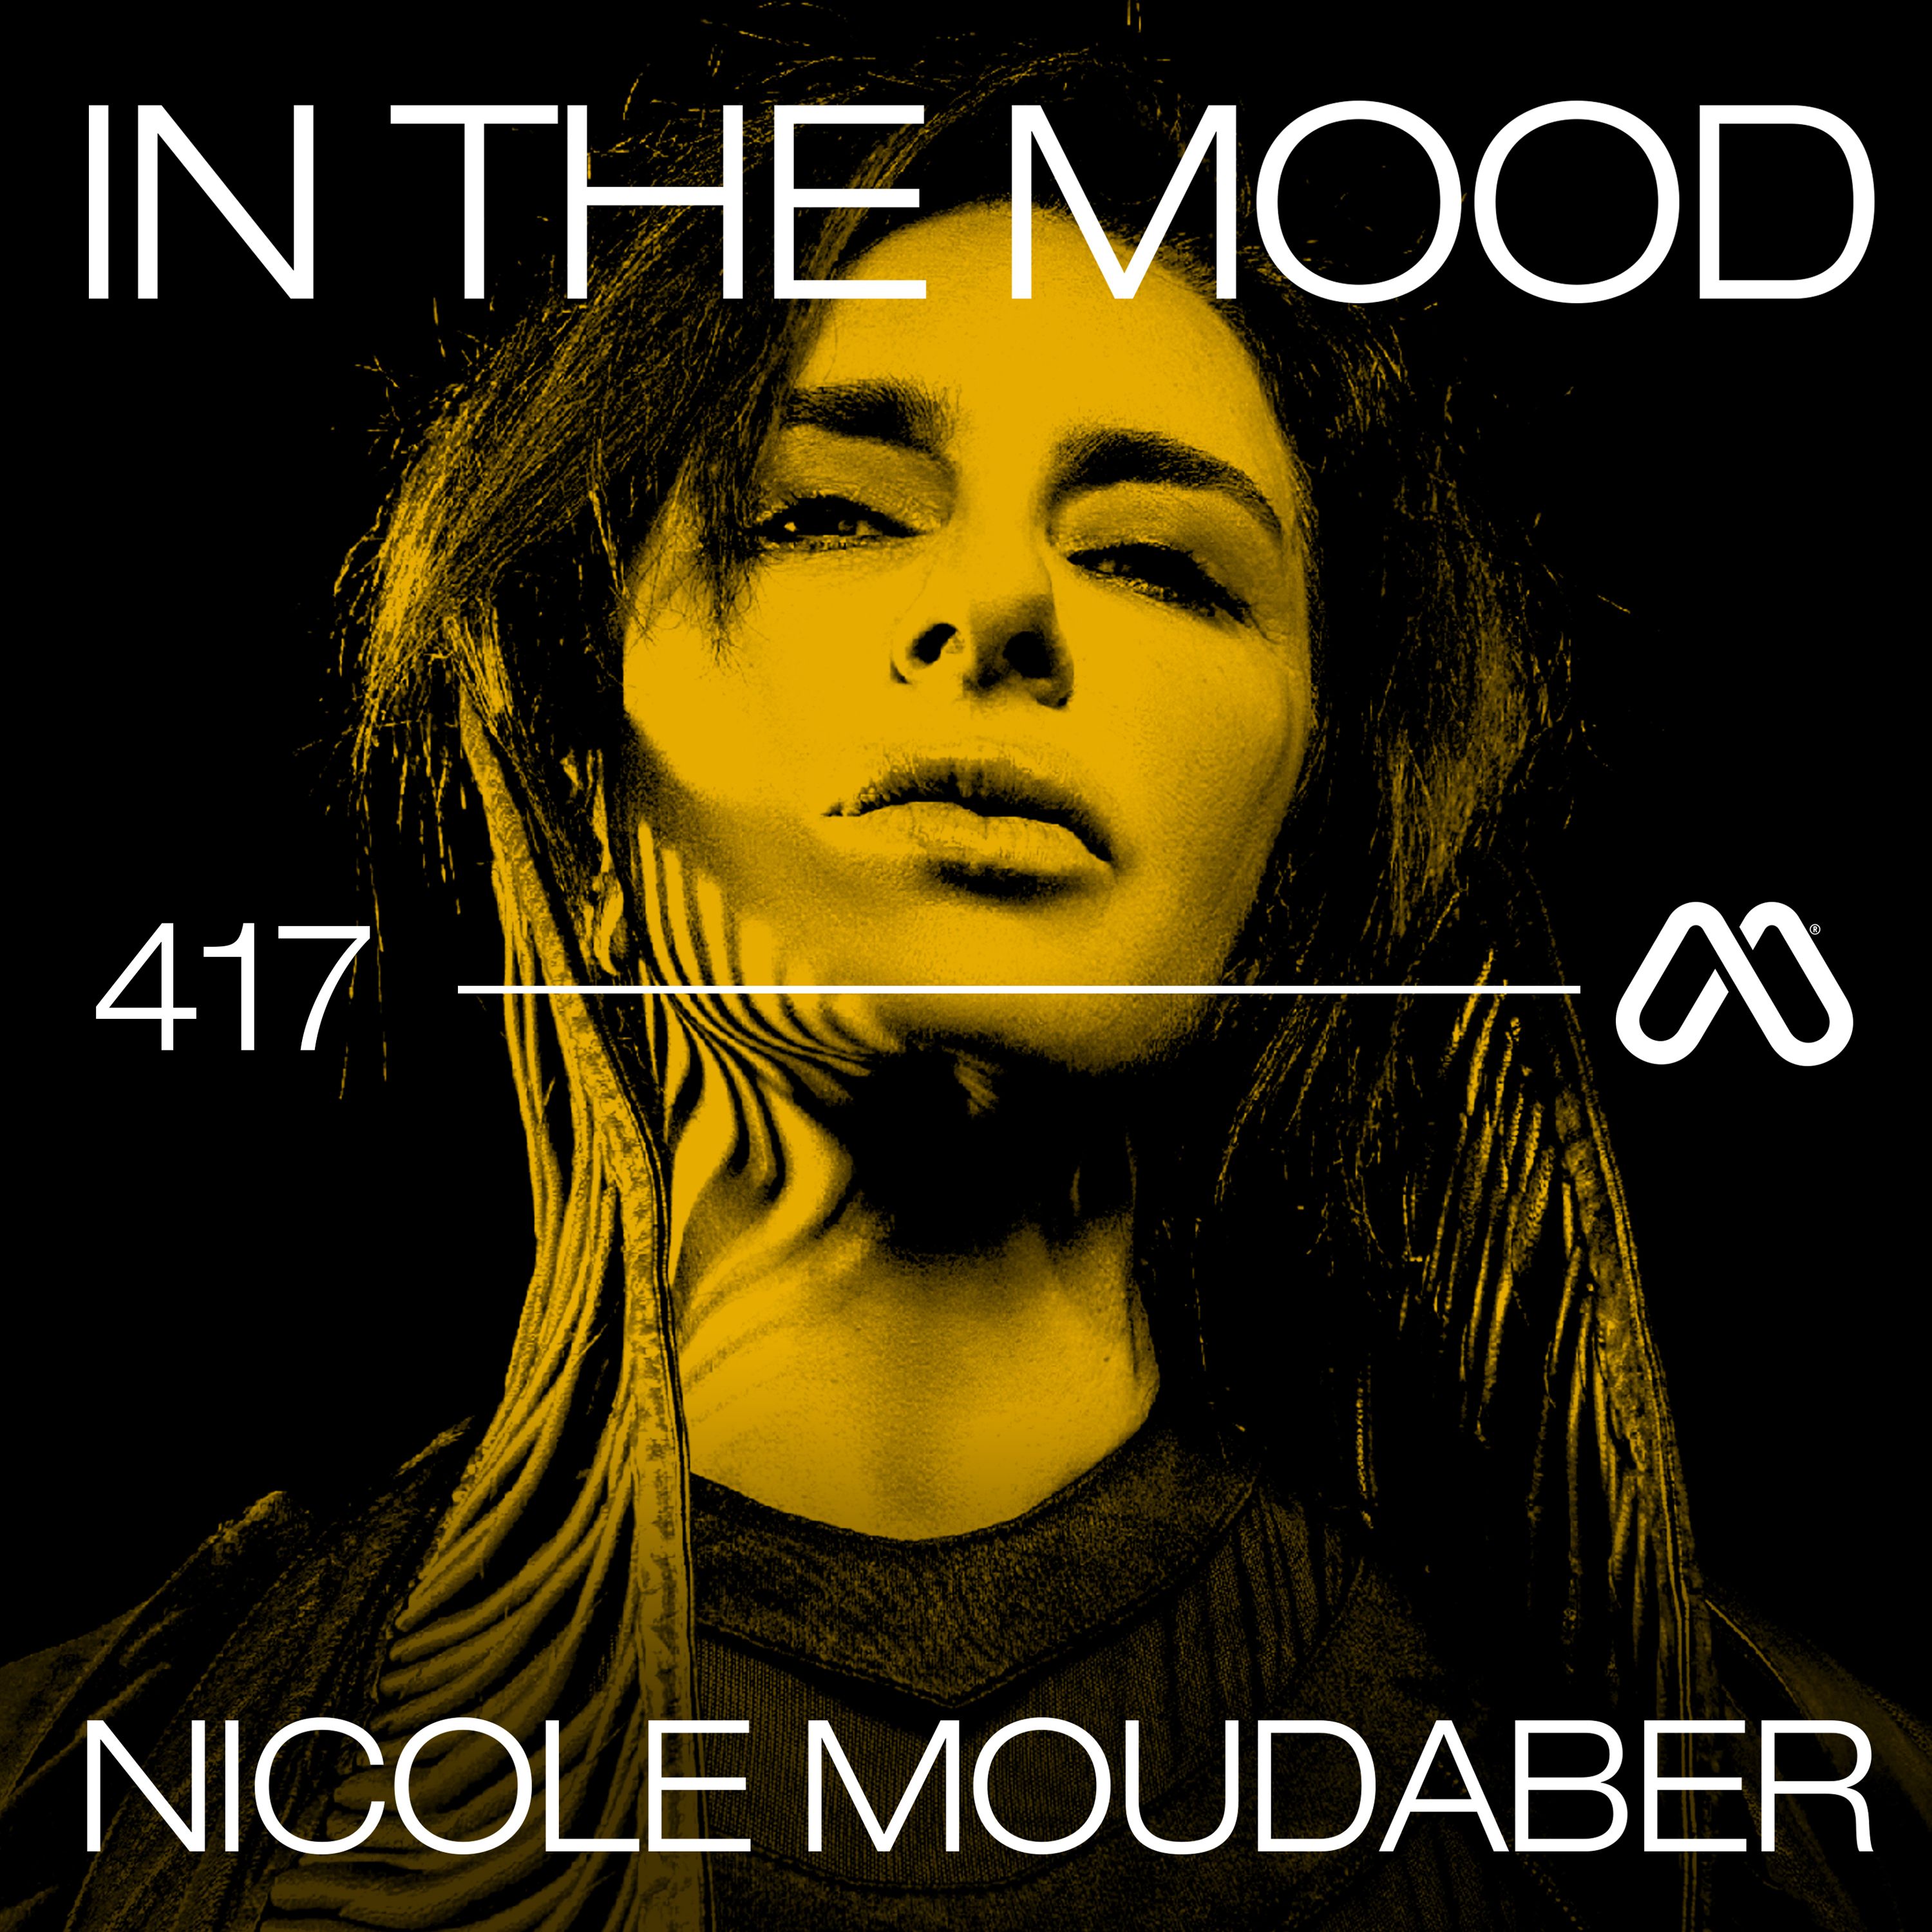 In the MOOD - Episode 417